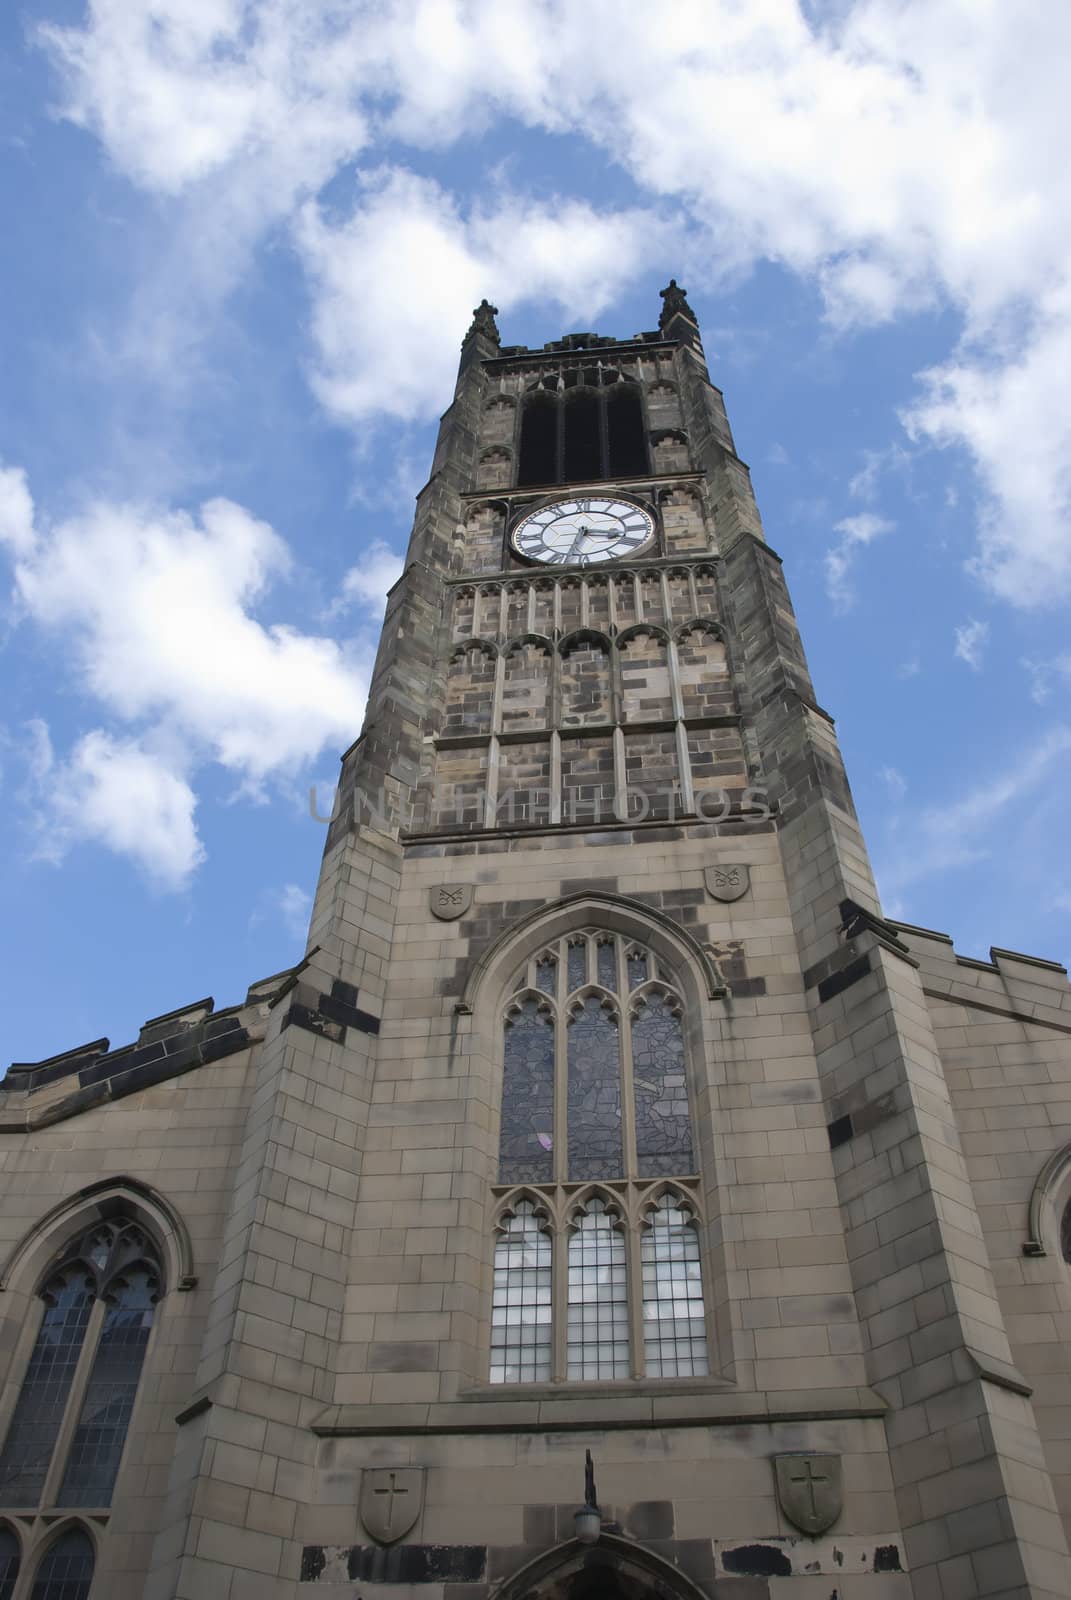 The Clocktower and Facade of a Yorkshire Church